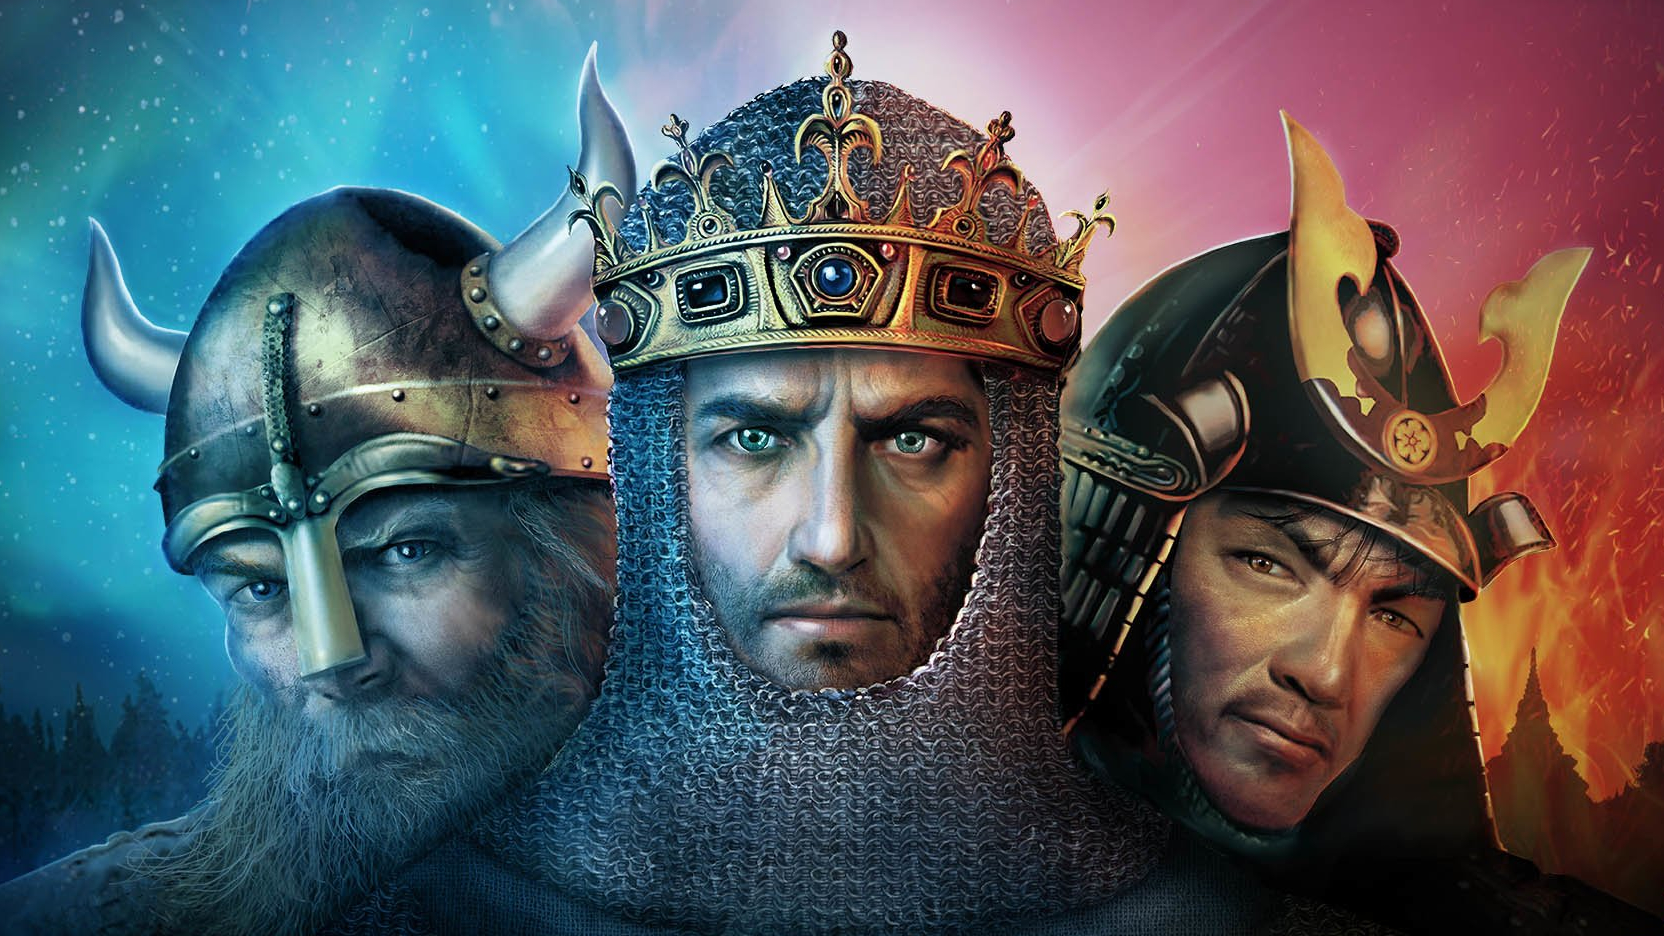 Age of Empires II the age of Kings. Age of Empires II HD. Age of Empires 2 обои. Age of Empires II: Definitive Edition. Le age